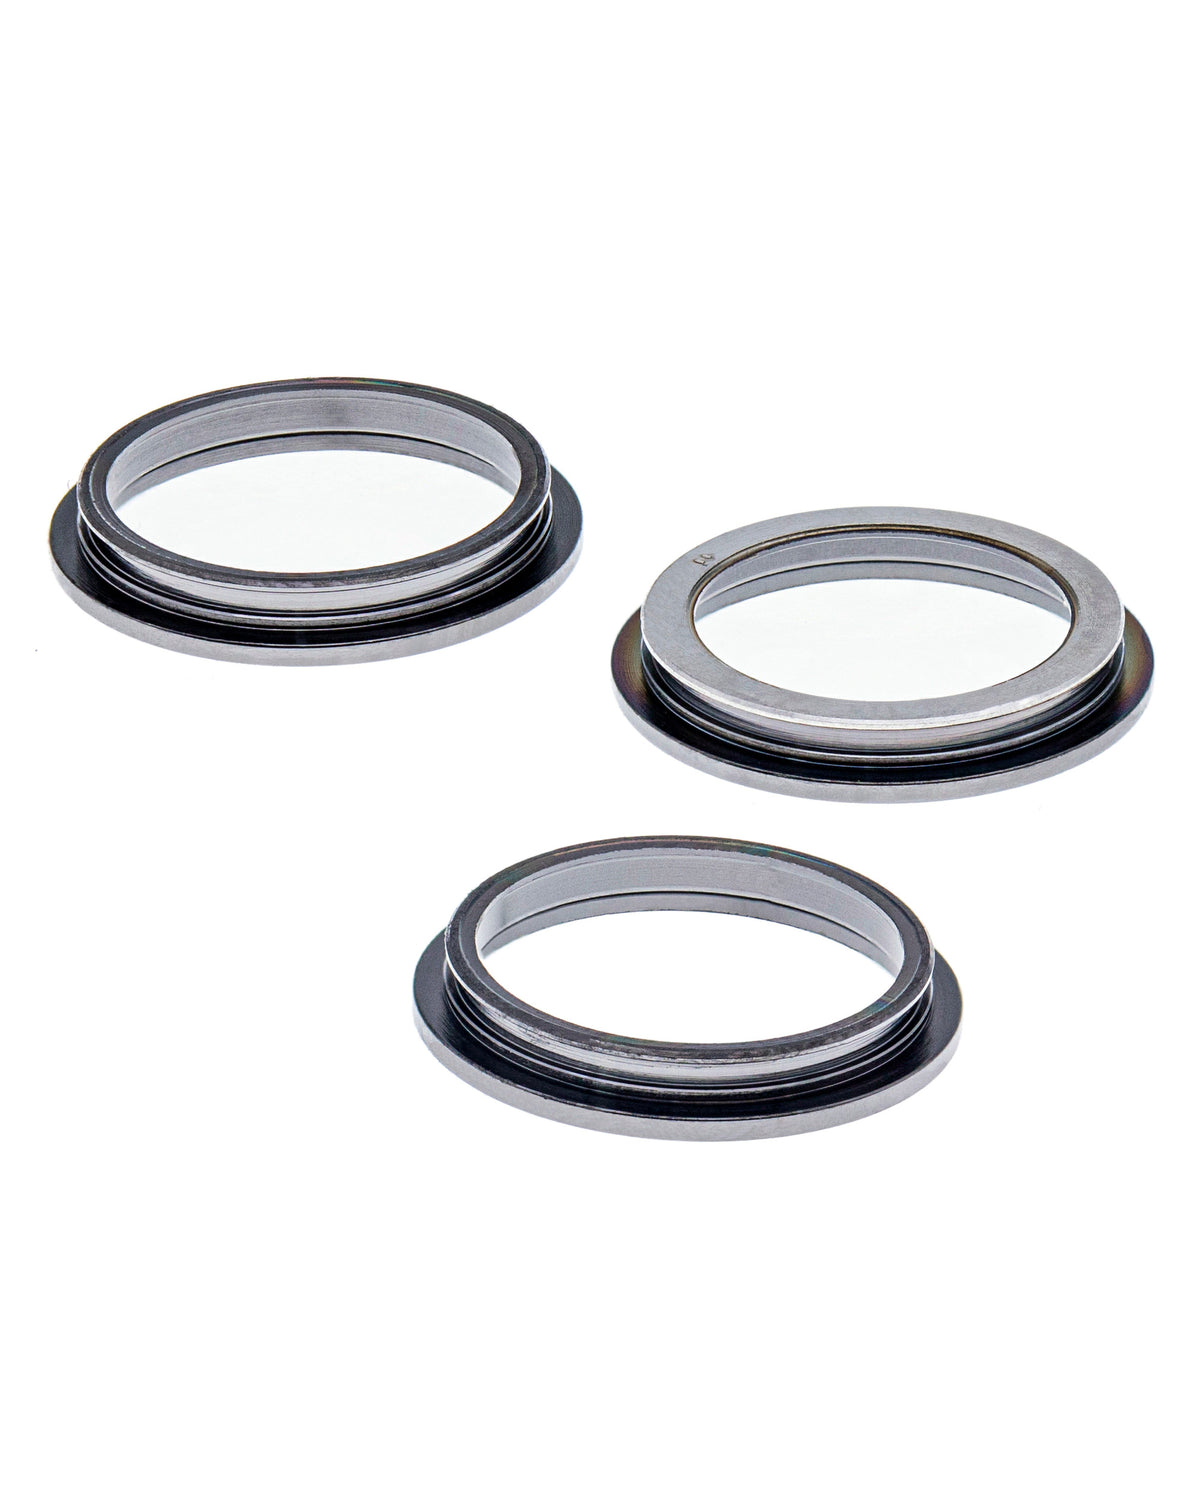 GRAPHITE - BACK CAMERA BEZEL RING ONLY (3 PIECE SET) FOR IPHONE 12 PRO  (10 PACK)